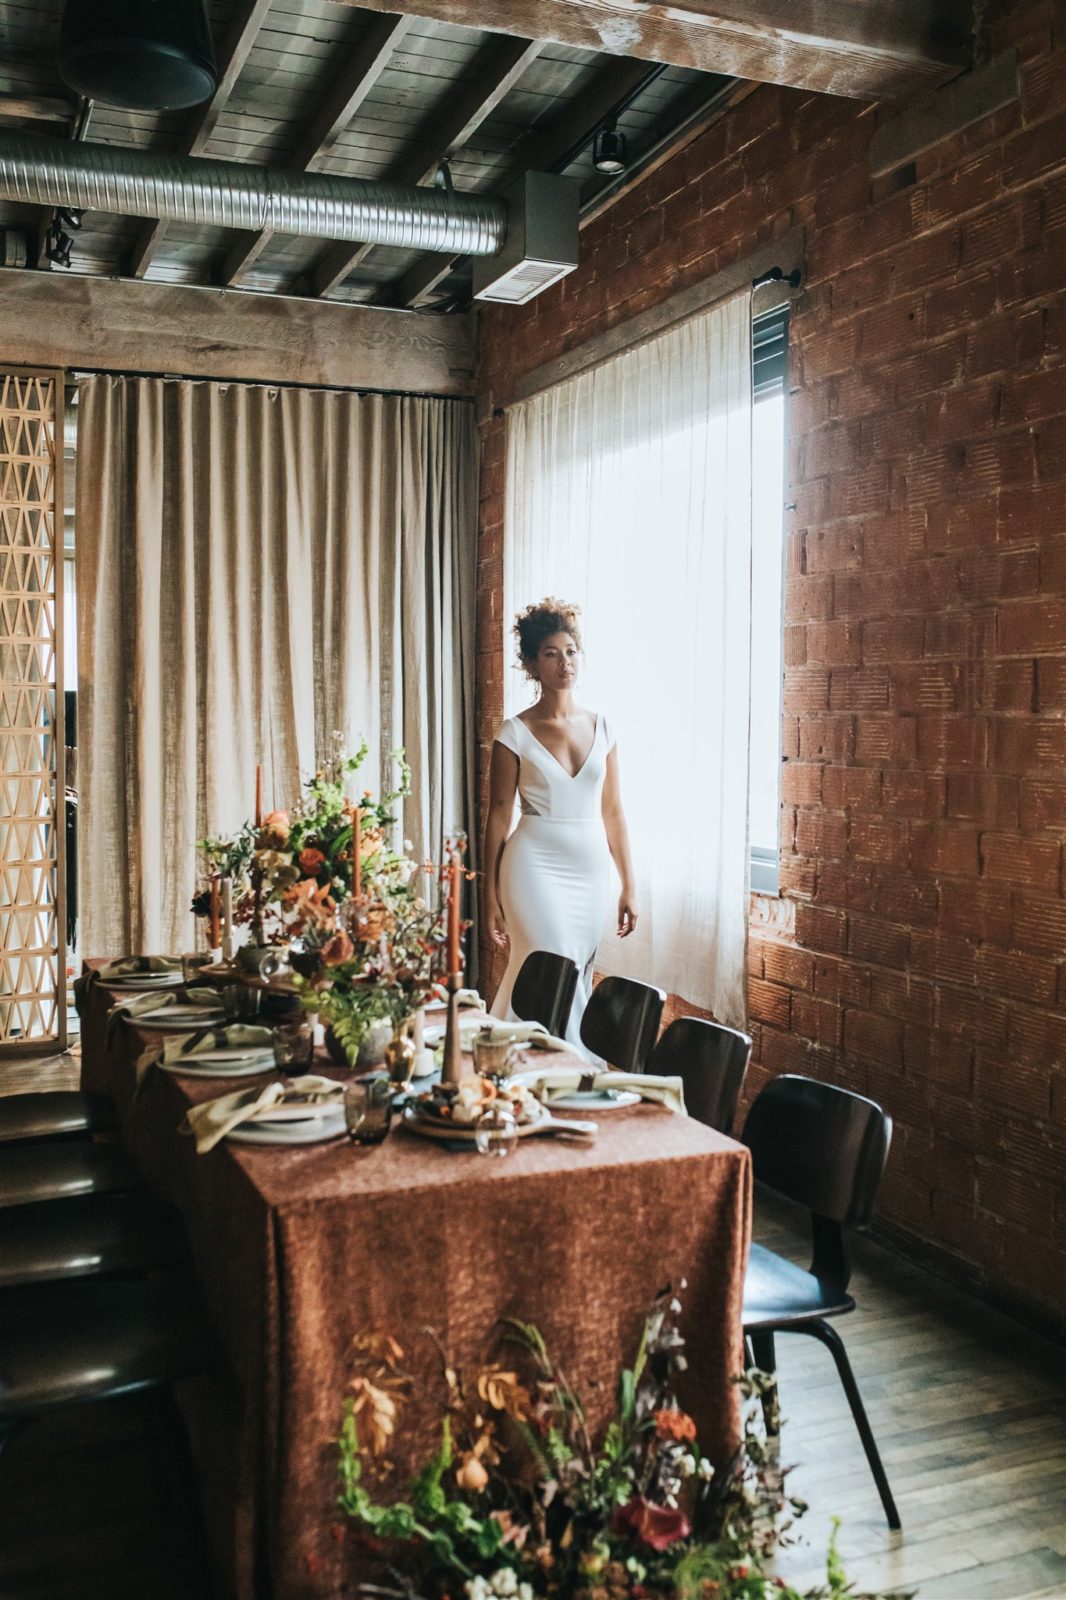 Bridal editorial with a colour palette perfect for fall at Bridgette Bar in Calgary Alberta